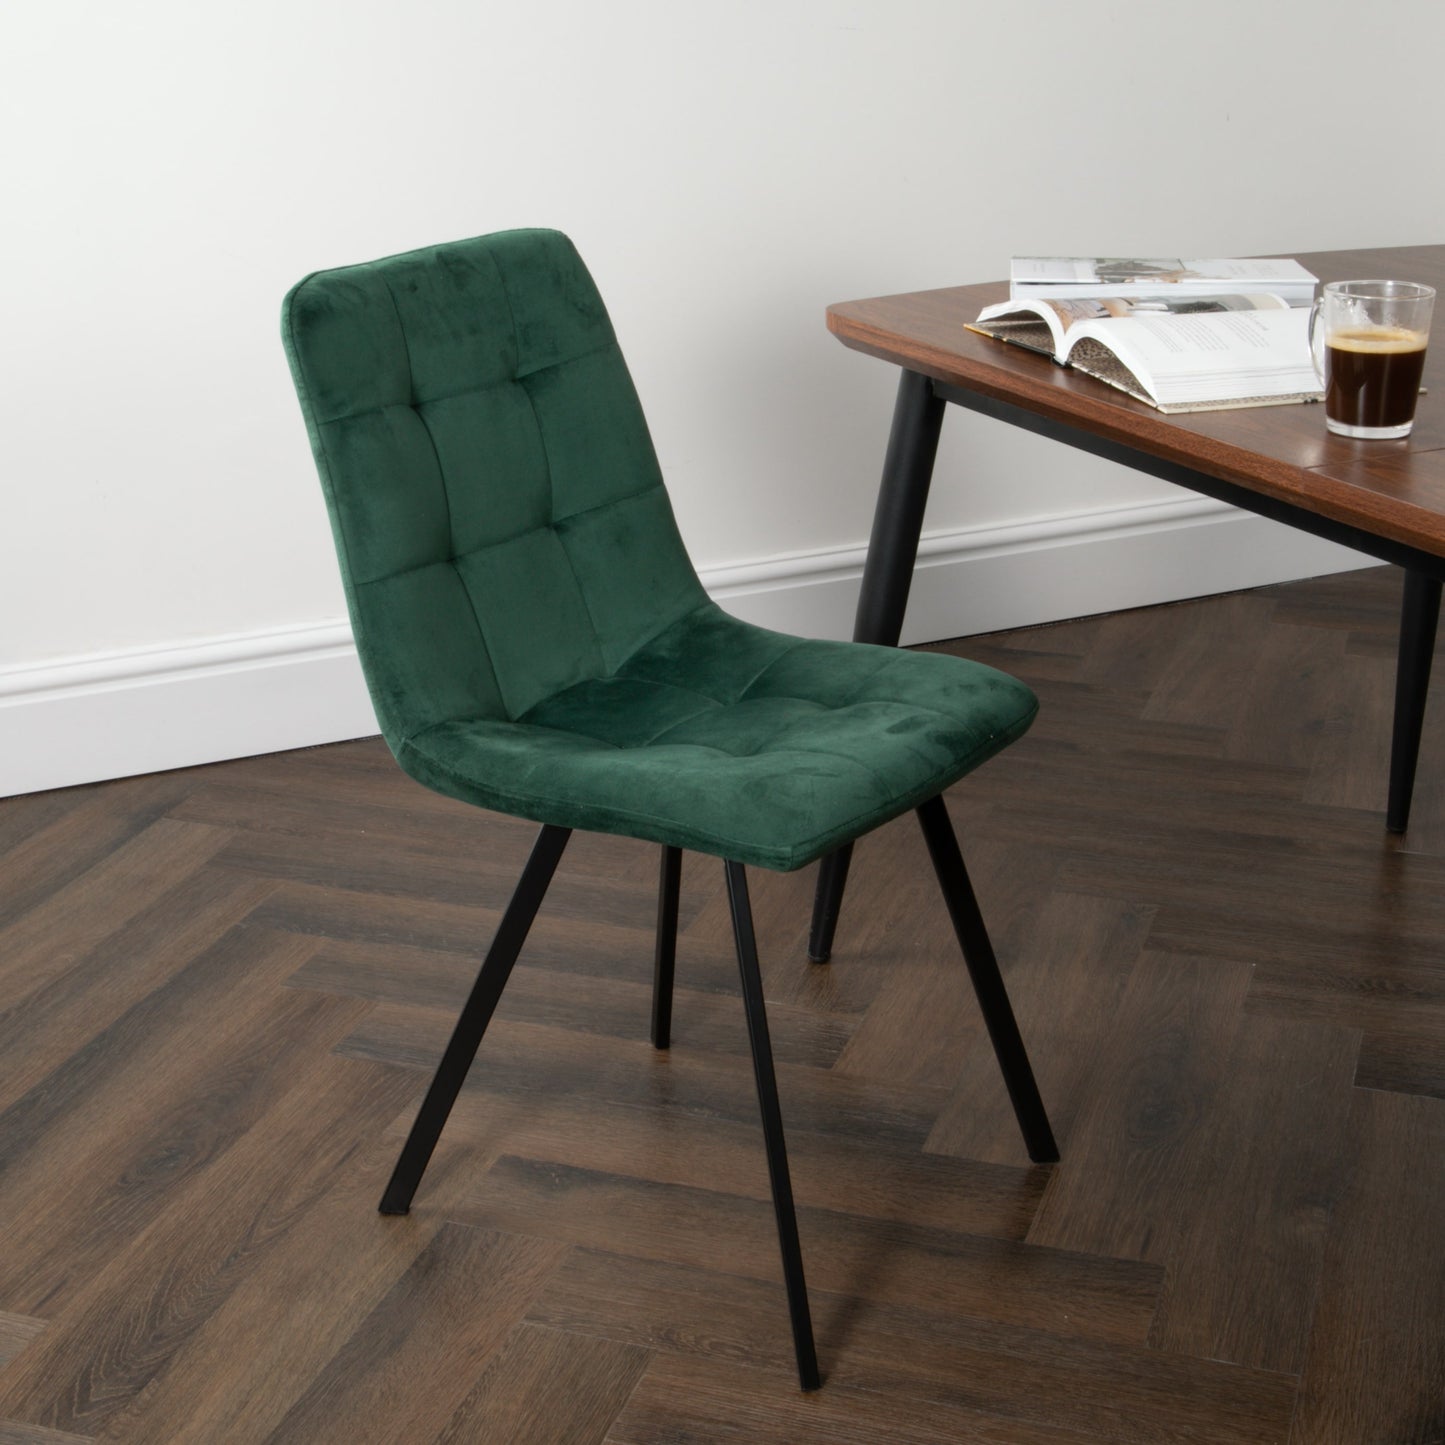 Squared Green Dining Chairs (set of 2)